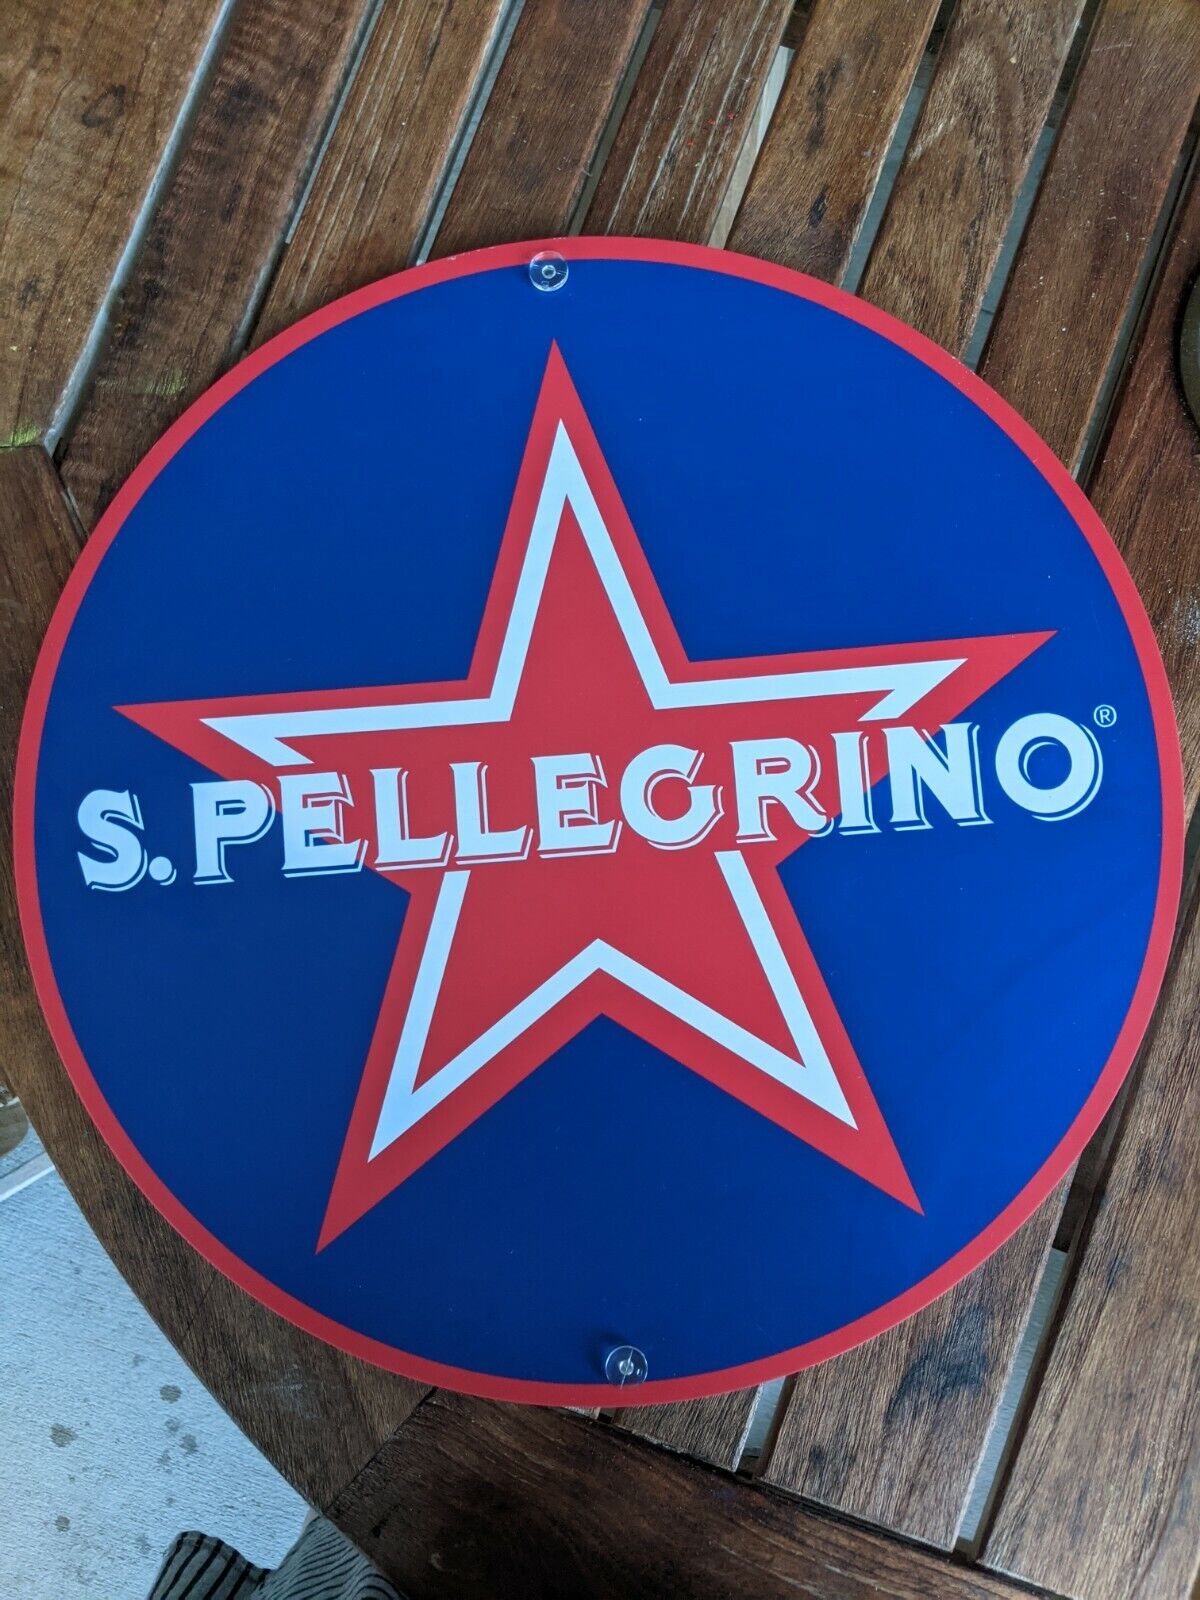 S. Pellegrino/Perrier Display Double-Sided Signs--Plastic, Can be taken Apart